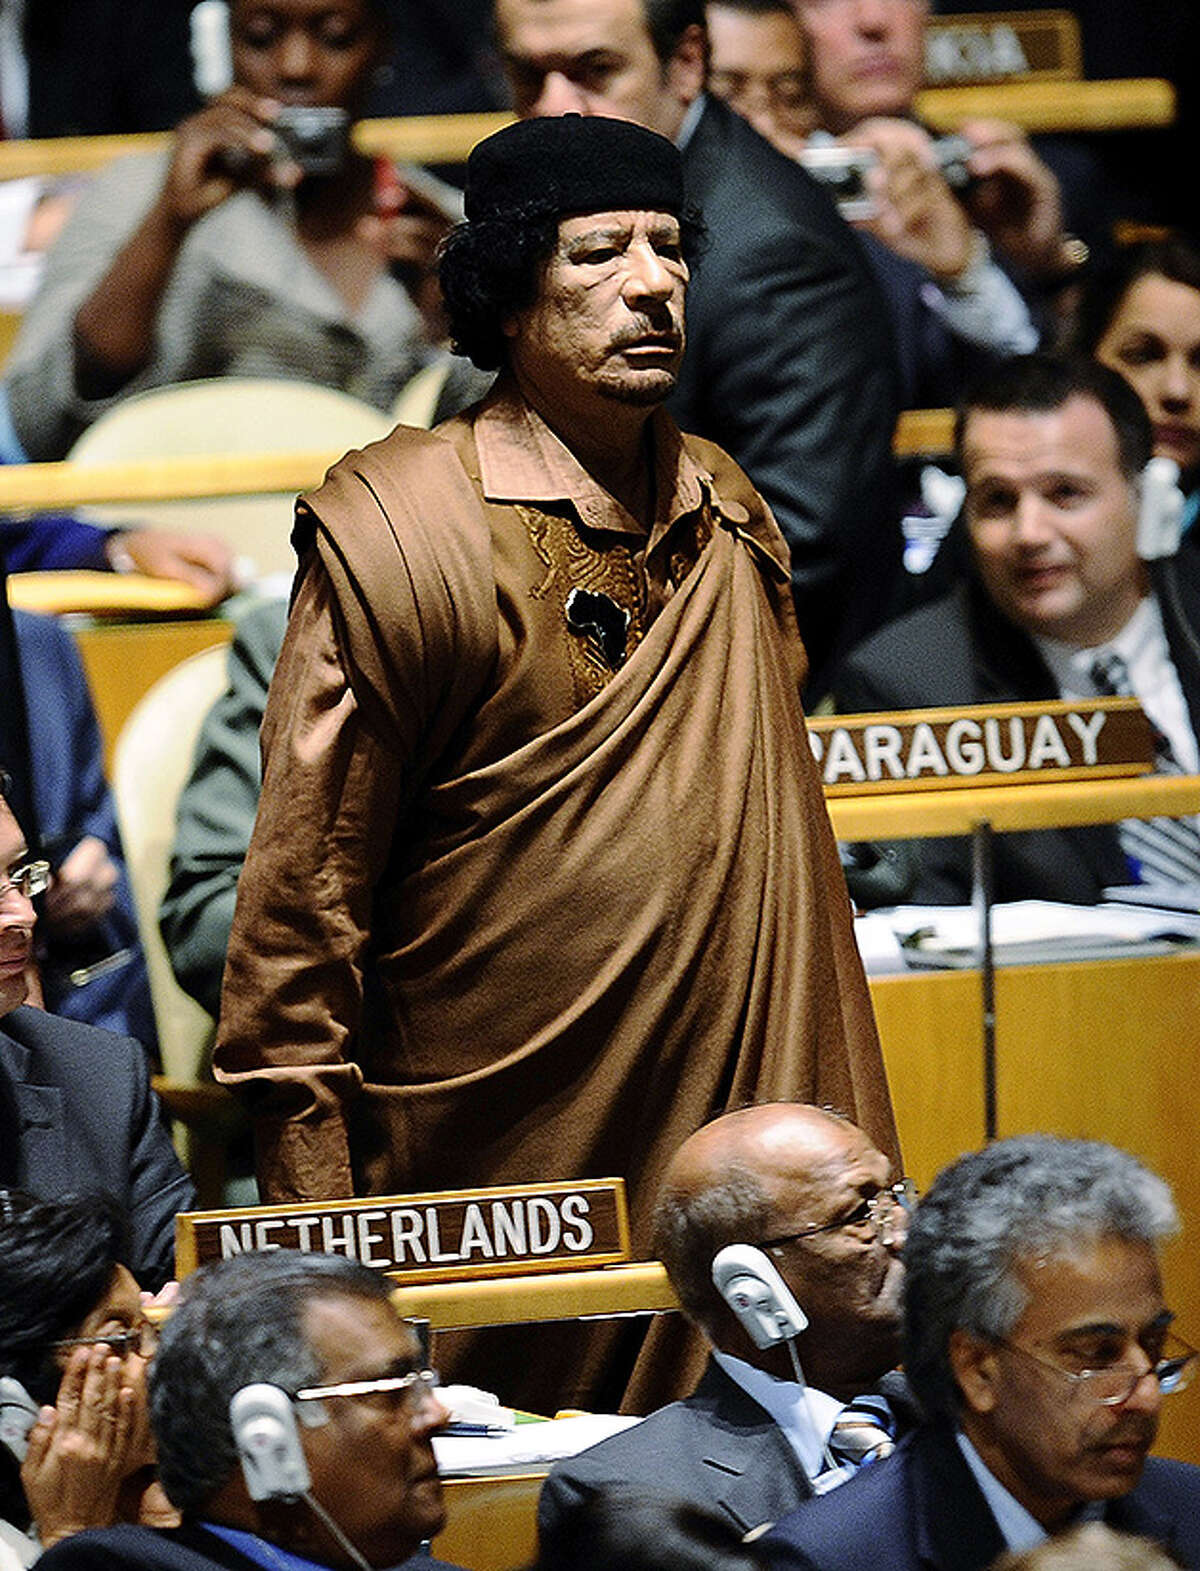 Libyan leader Colonel Moammar Gadhafi walks through the chamber at the 64th General Assembly at United Nations Headquarters on September 23, 2009 in New York City.